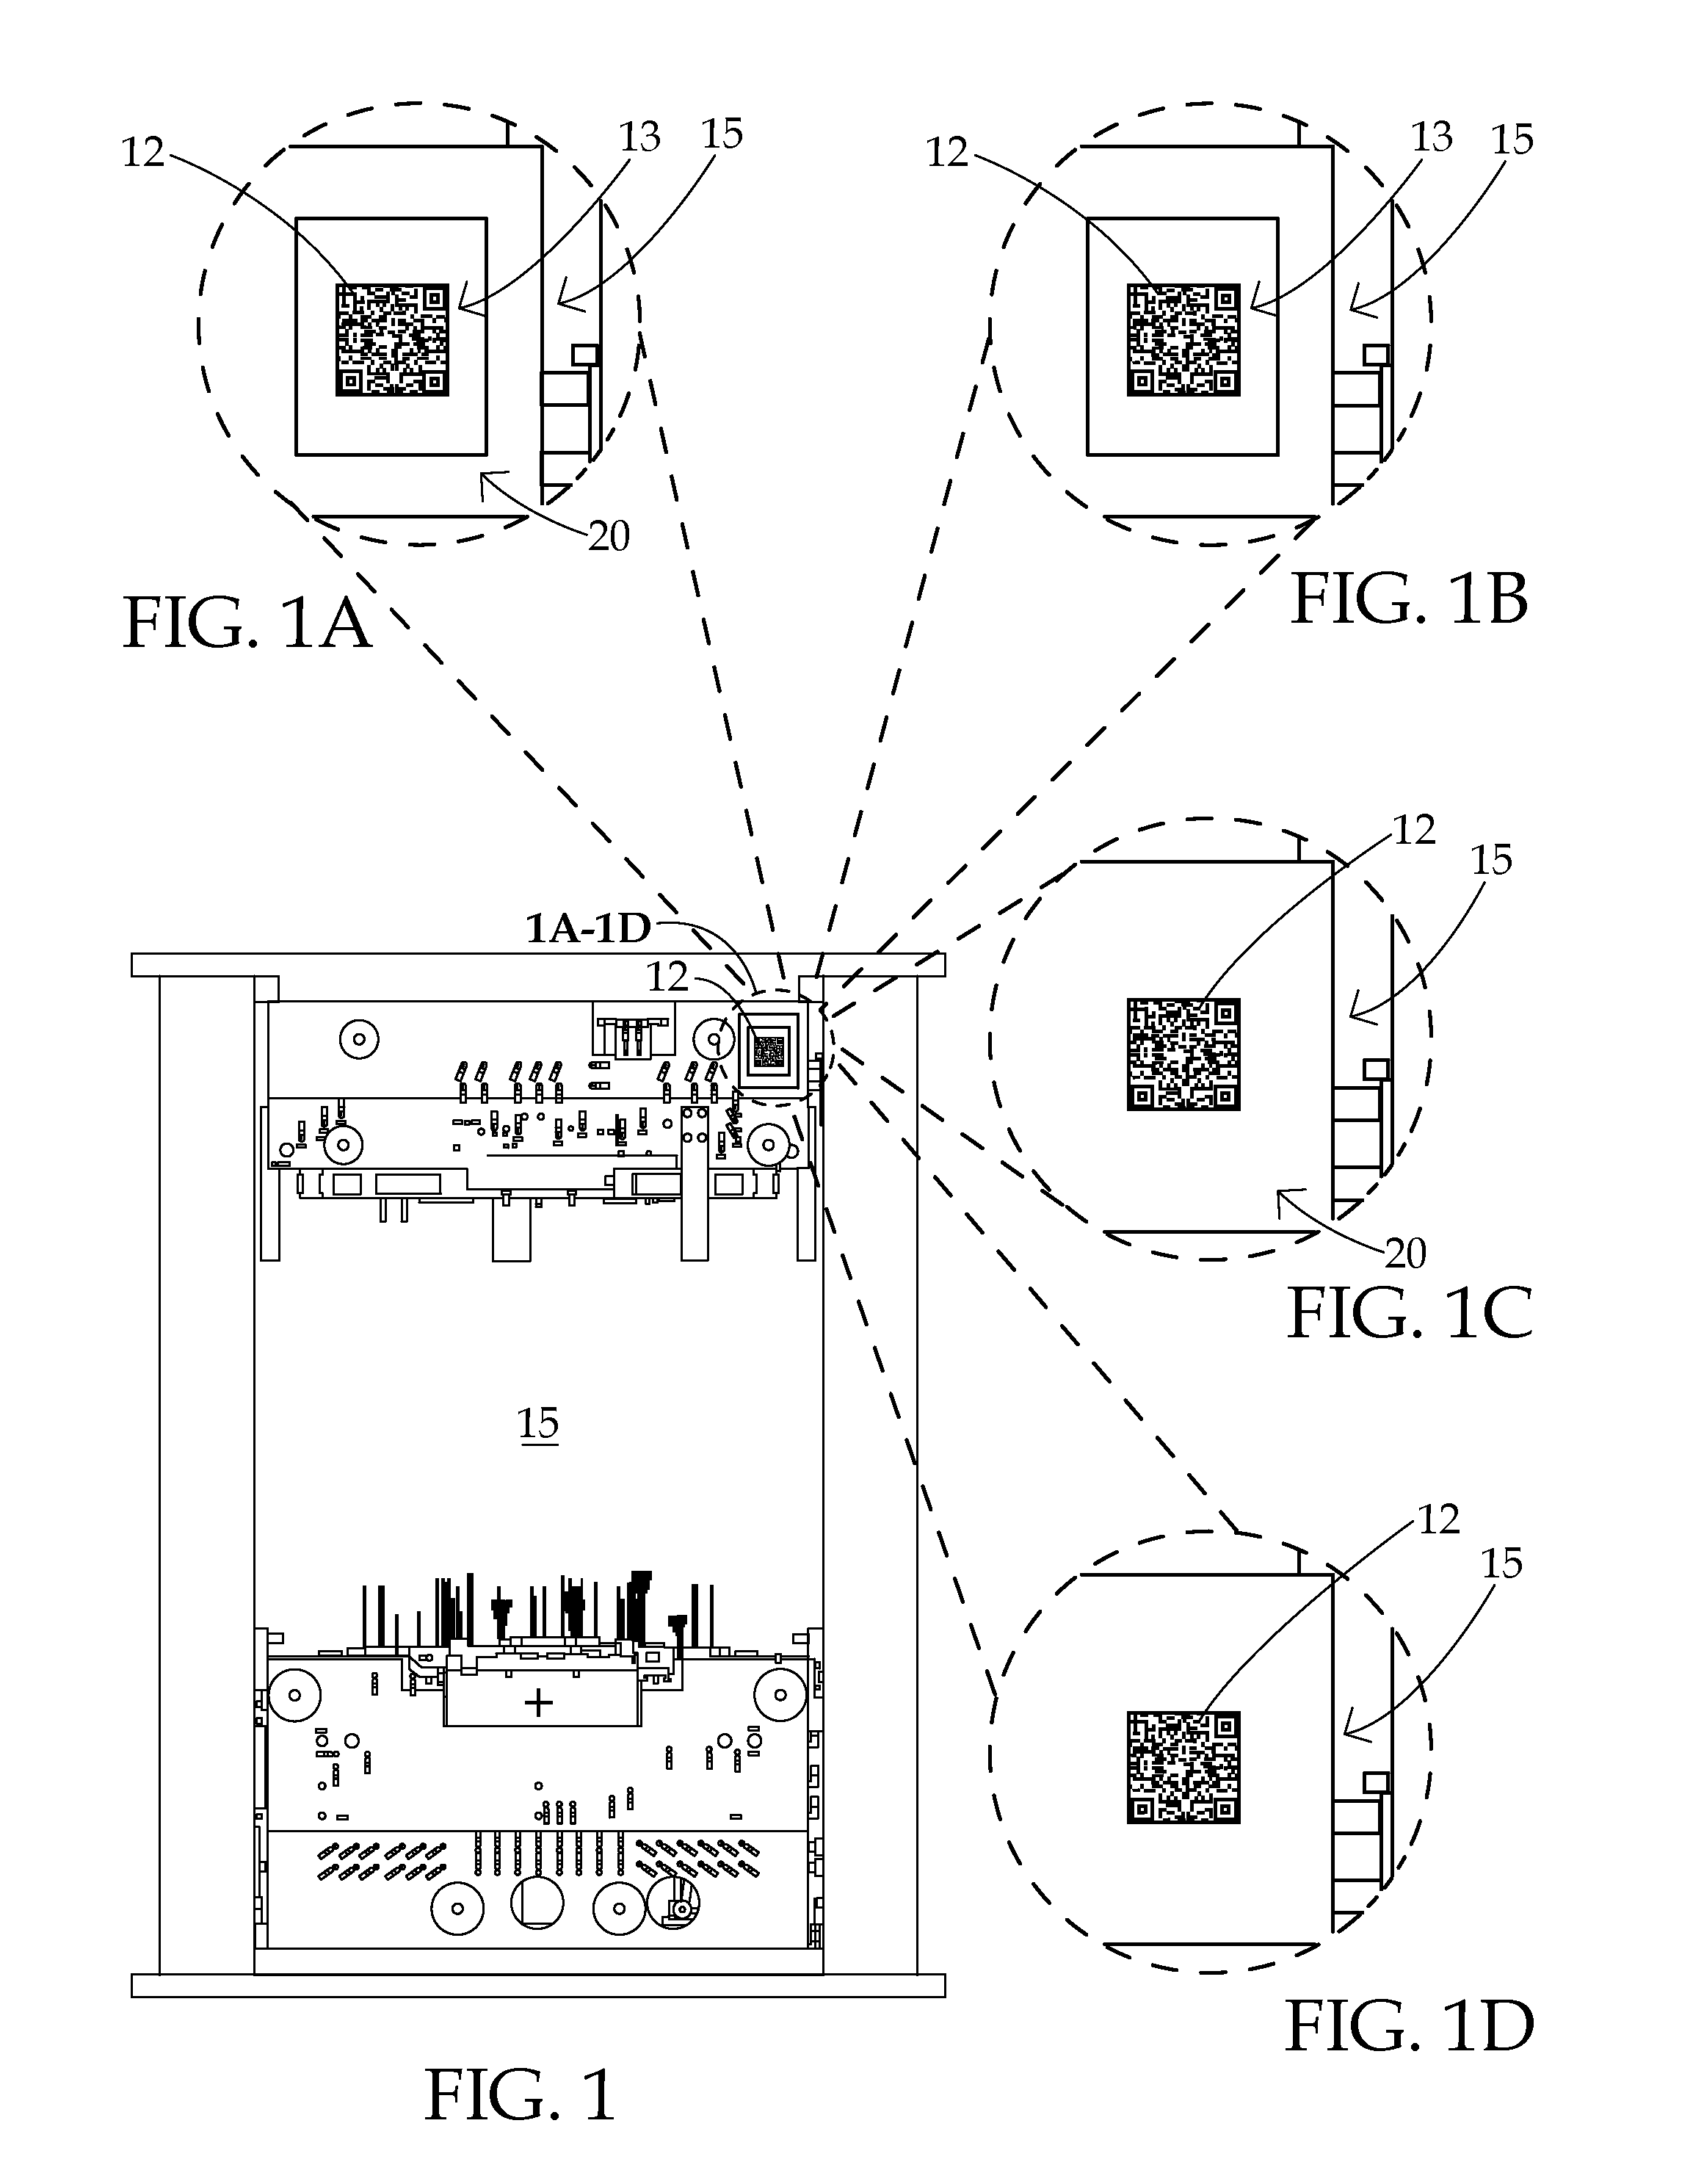 System of using machine readable labels affixed to tools for managing information related to those tools